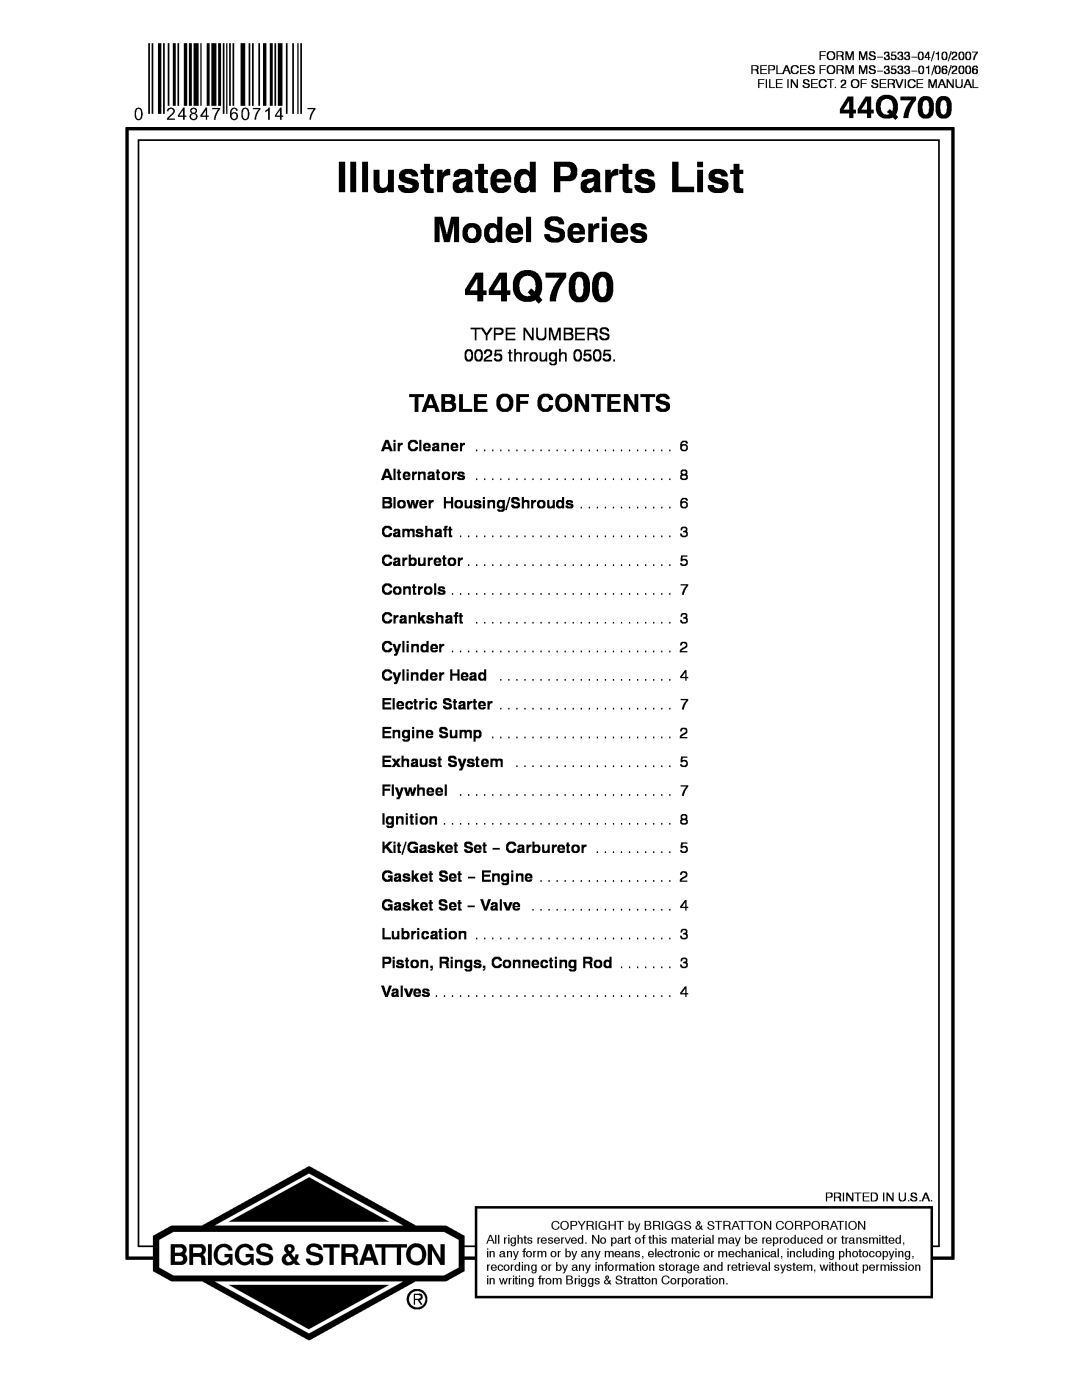 Briggs & Stratton 44Q700 service manual Illustrated Parts List, Model Series, Table Of Contents, TYPE NUMBERS 0025 through 